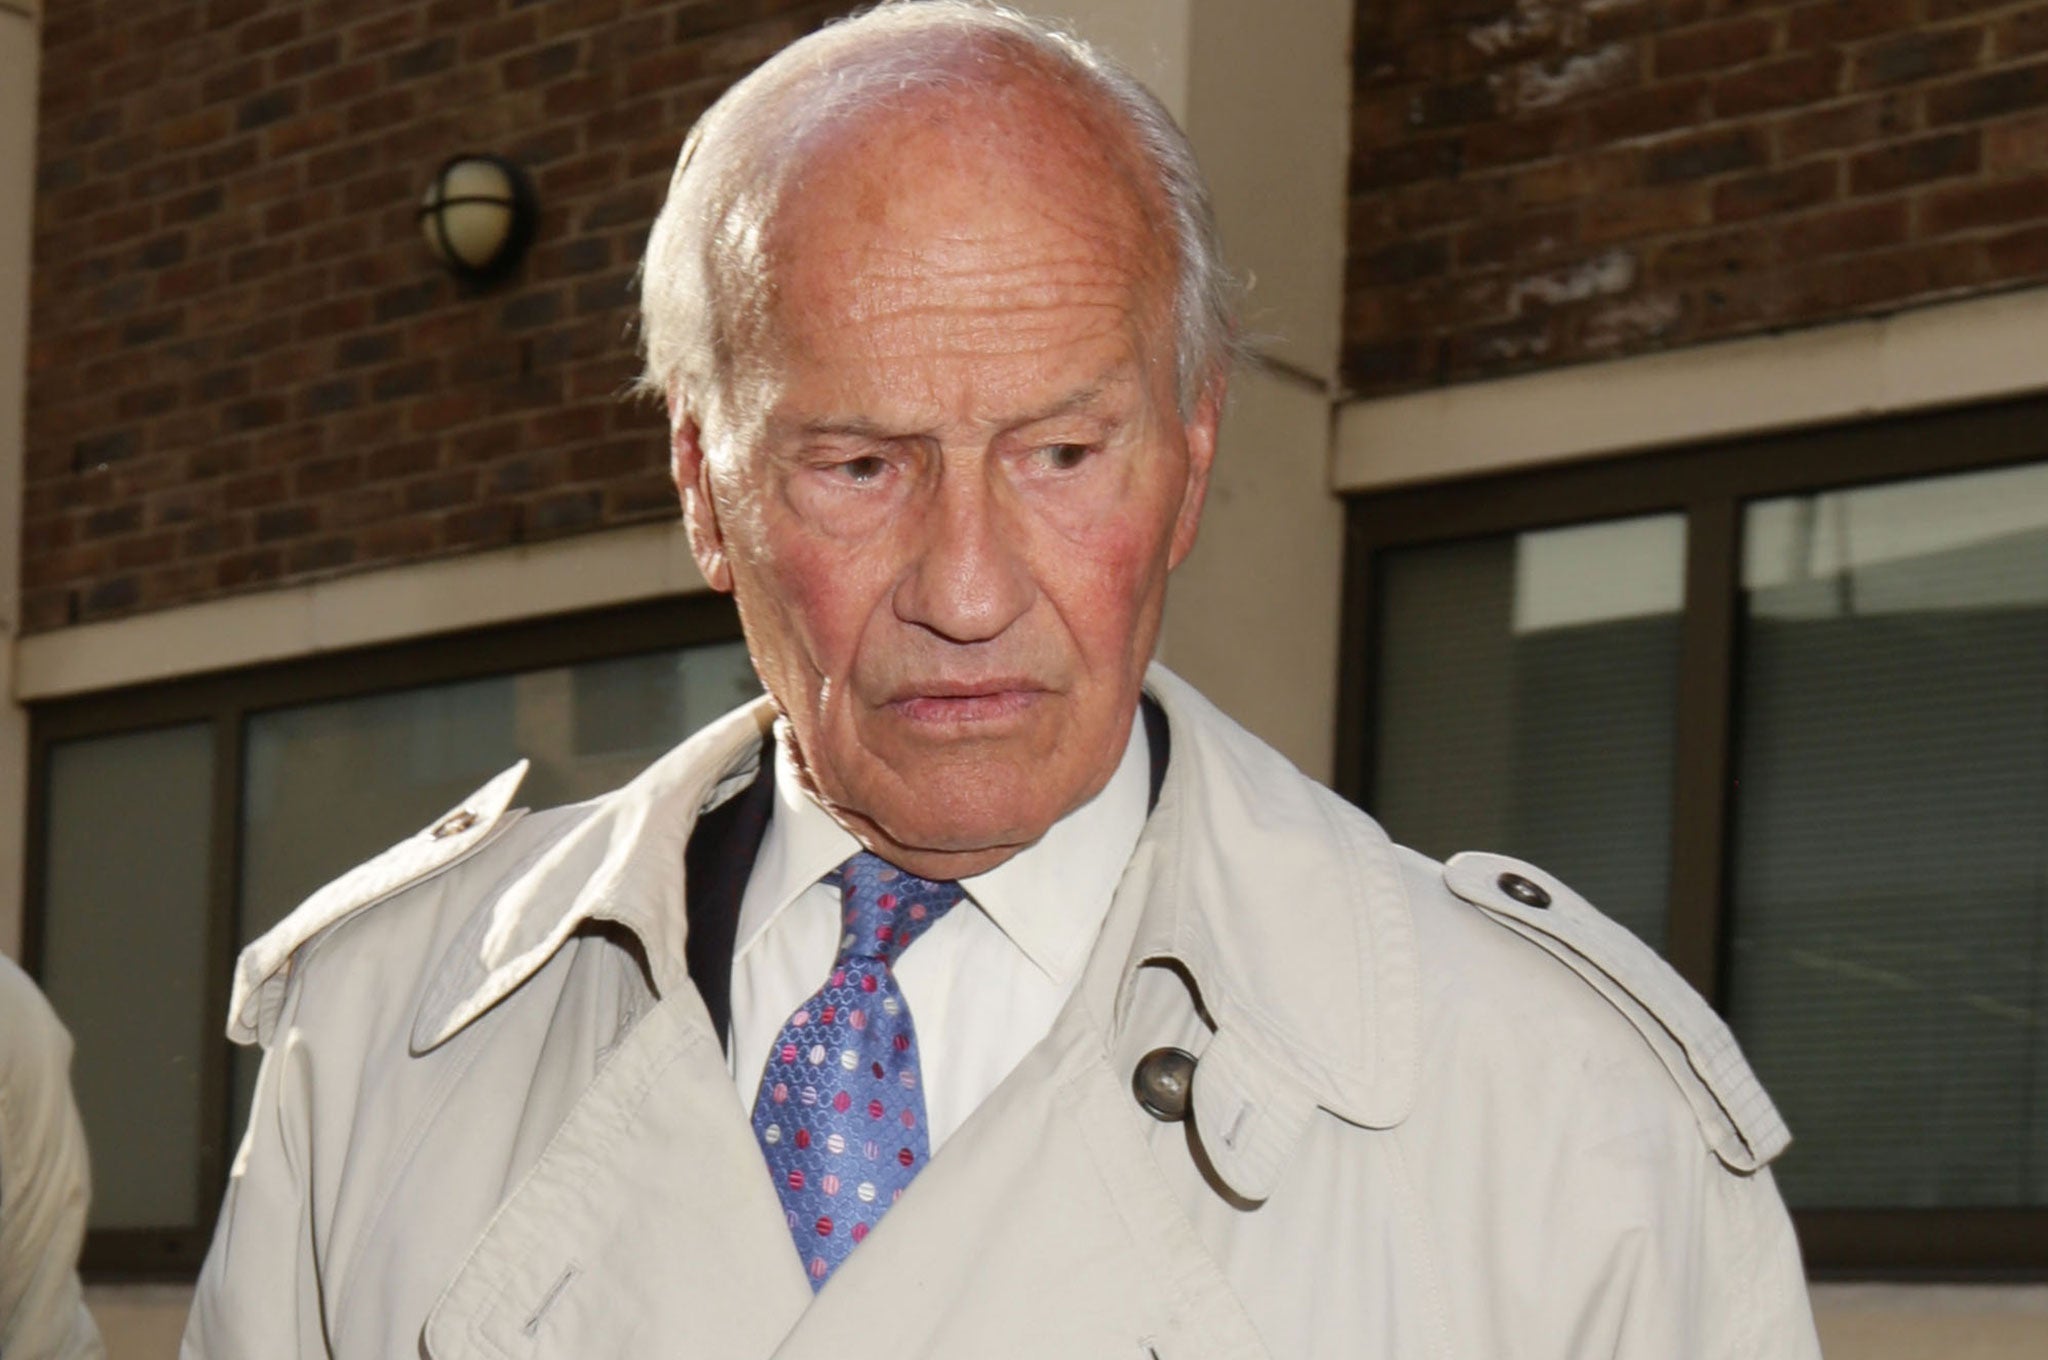 Former aide to the Duke of Edinburgh Benjamin Herman has been cleared of sex abuse allegations at Blackfriars Crown Court